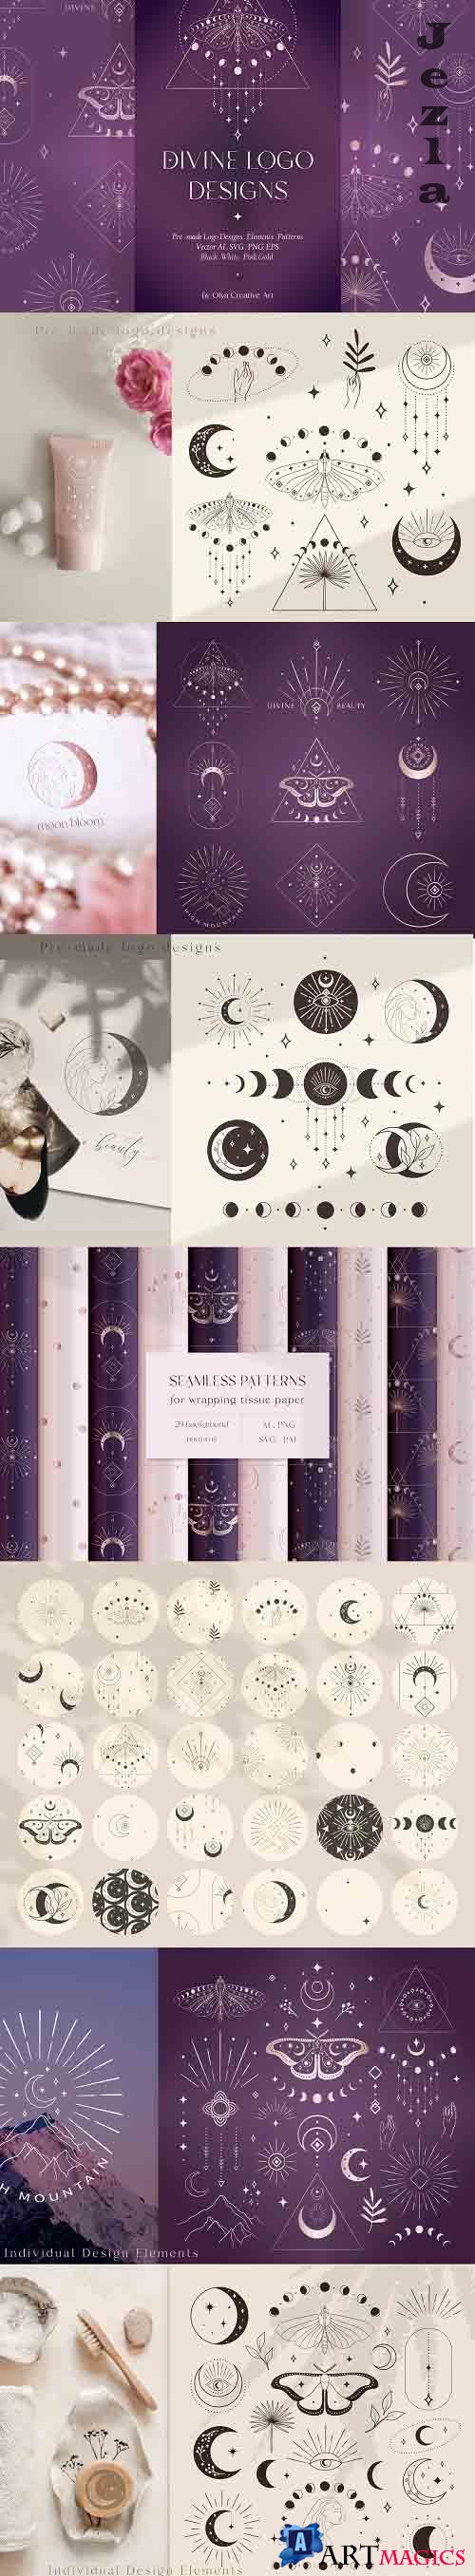 Divine Beauty Logo Designs, Elements and Patterns Collection - 6131969